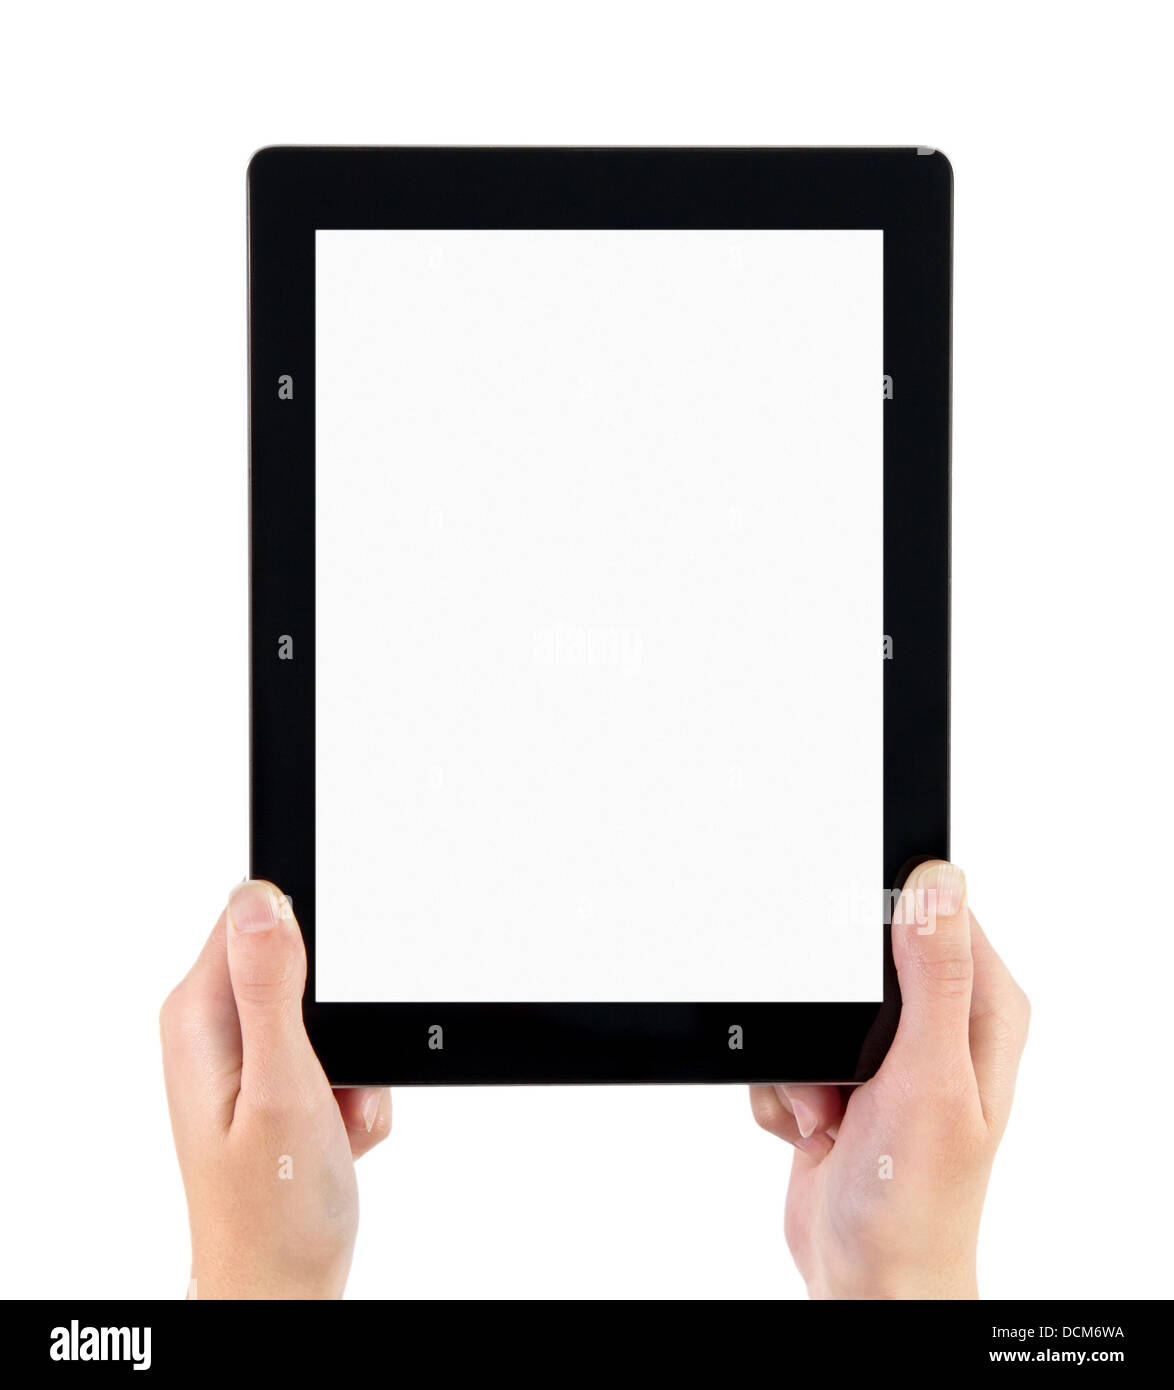 Holding Electronic Tablet PC In Hands Stock Photo